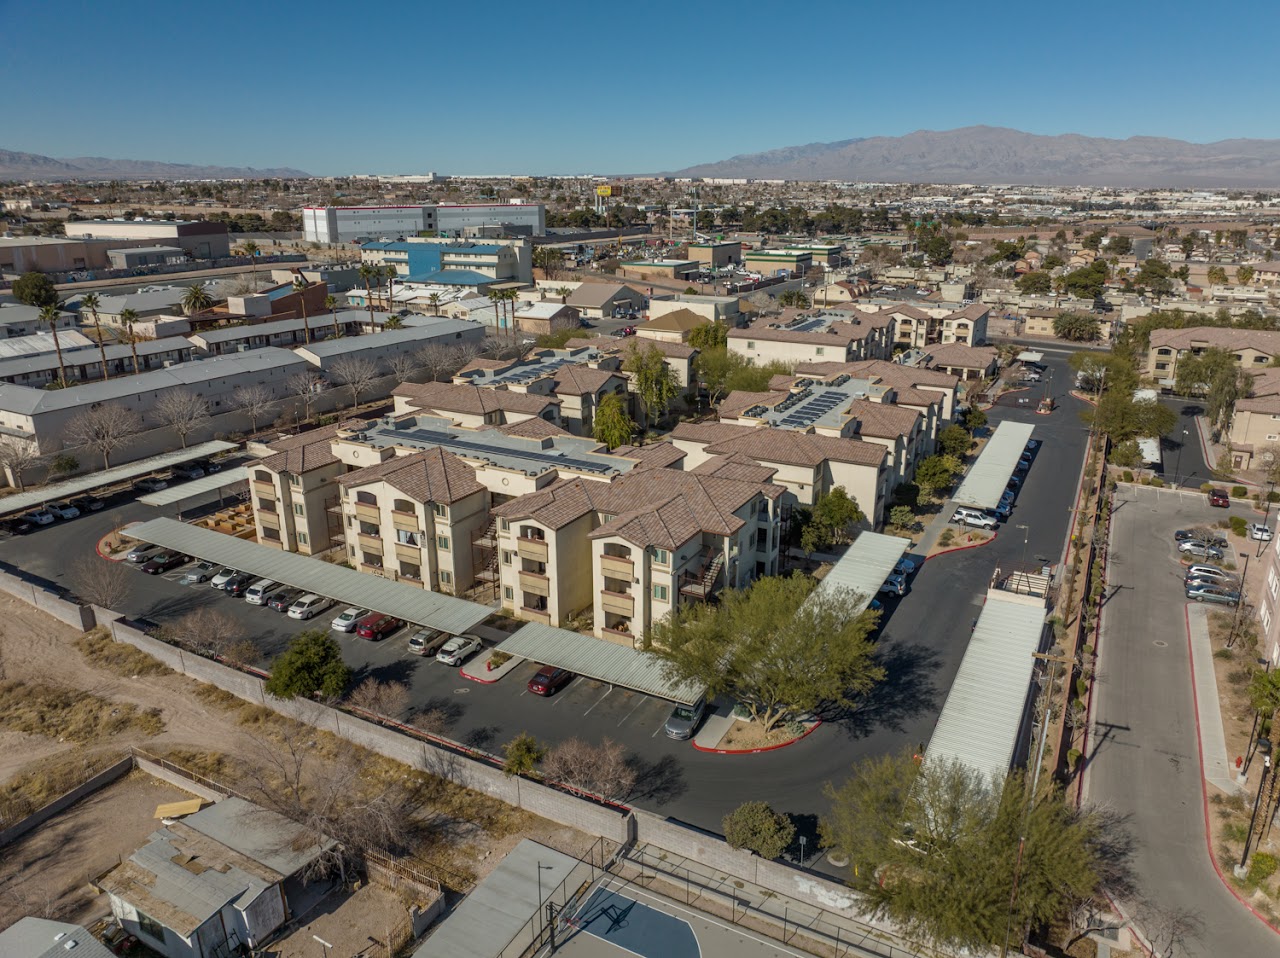 Photo of SKY VIEW PINES APTS. Affordable housing located at 21 W OWENS AVE LAS VEGAS, NV 89030